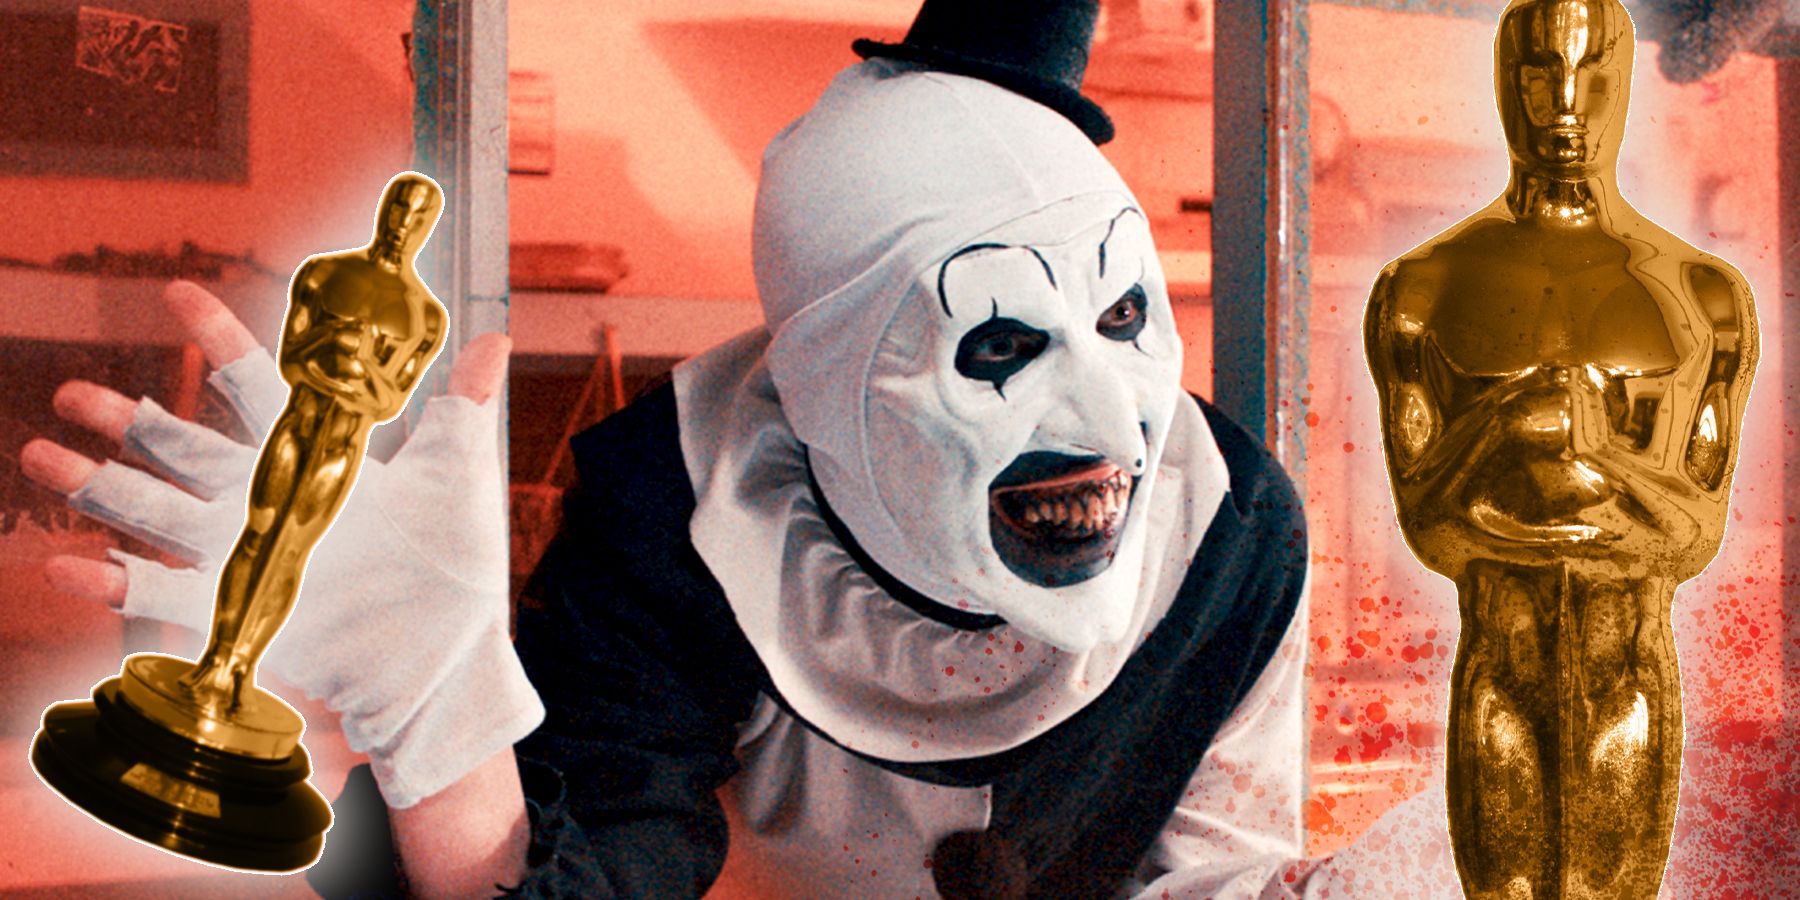 Terrifier 2 Is up for Oscar Consideration - But What Categories Could It Aim For